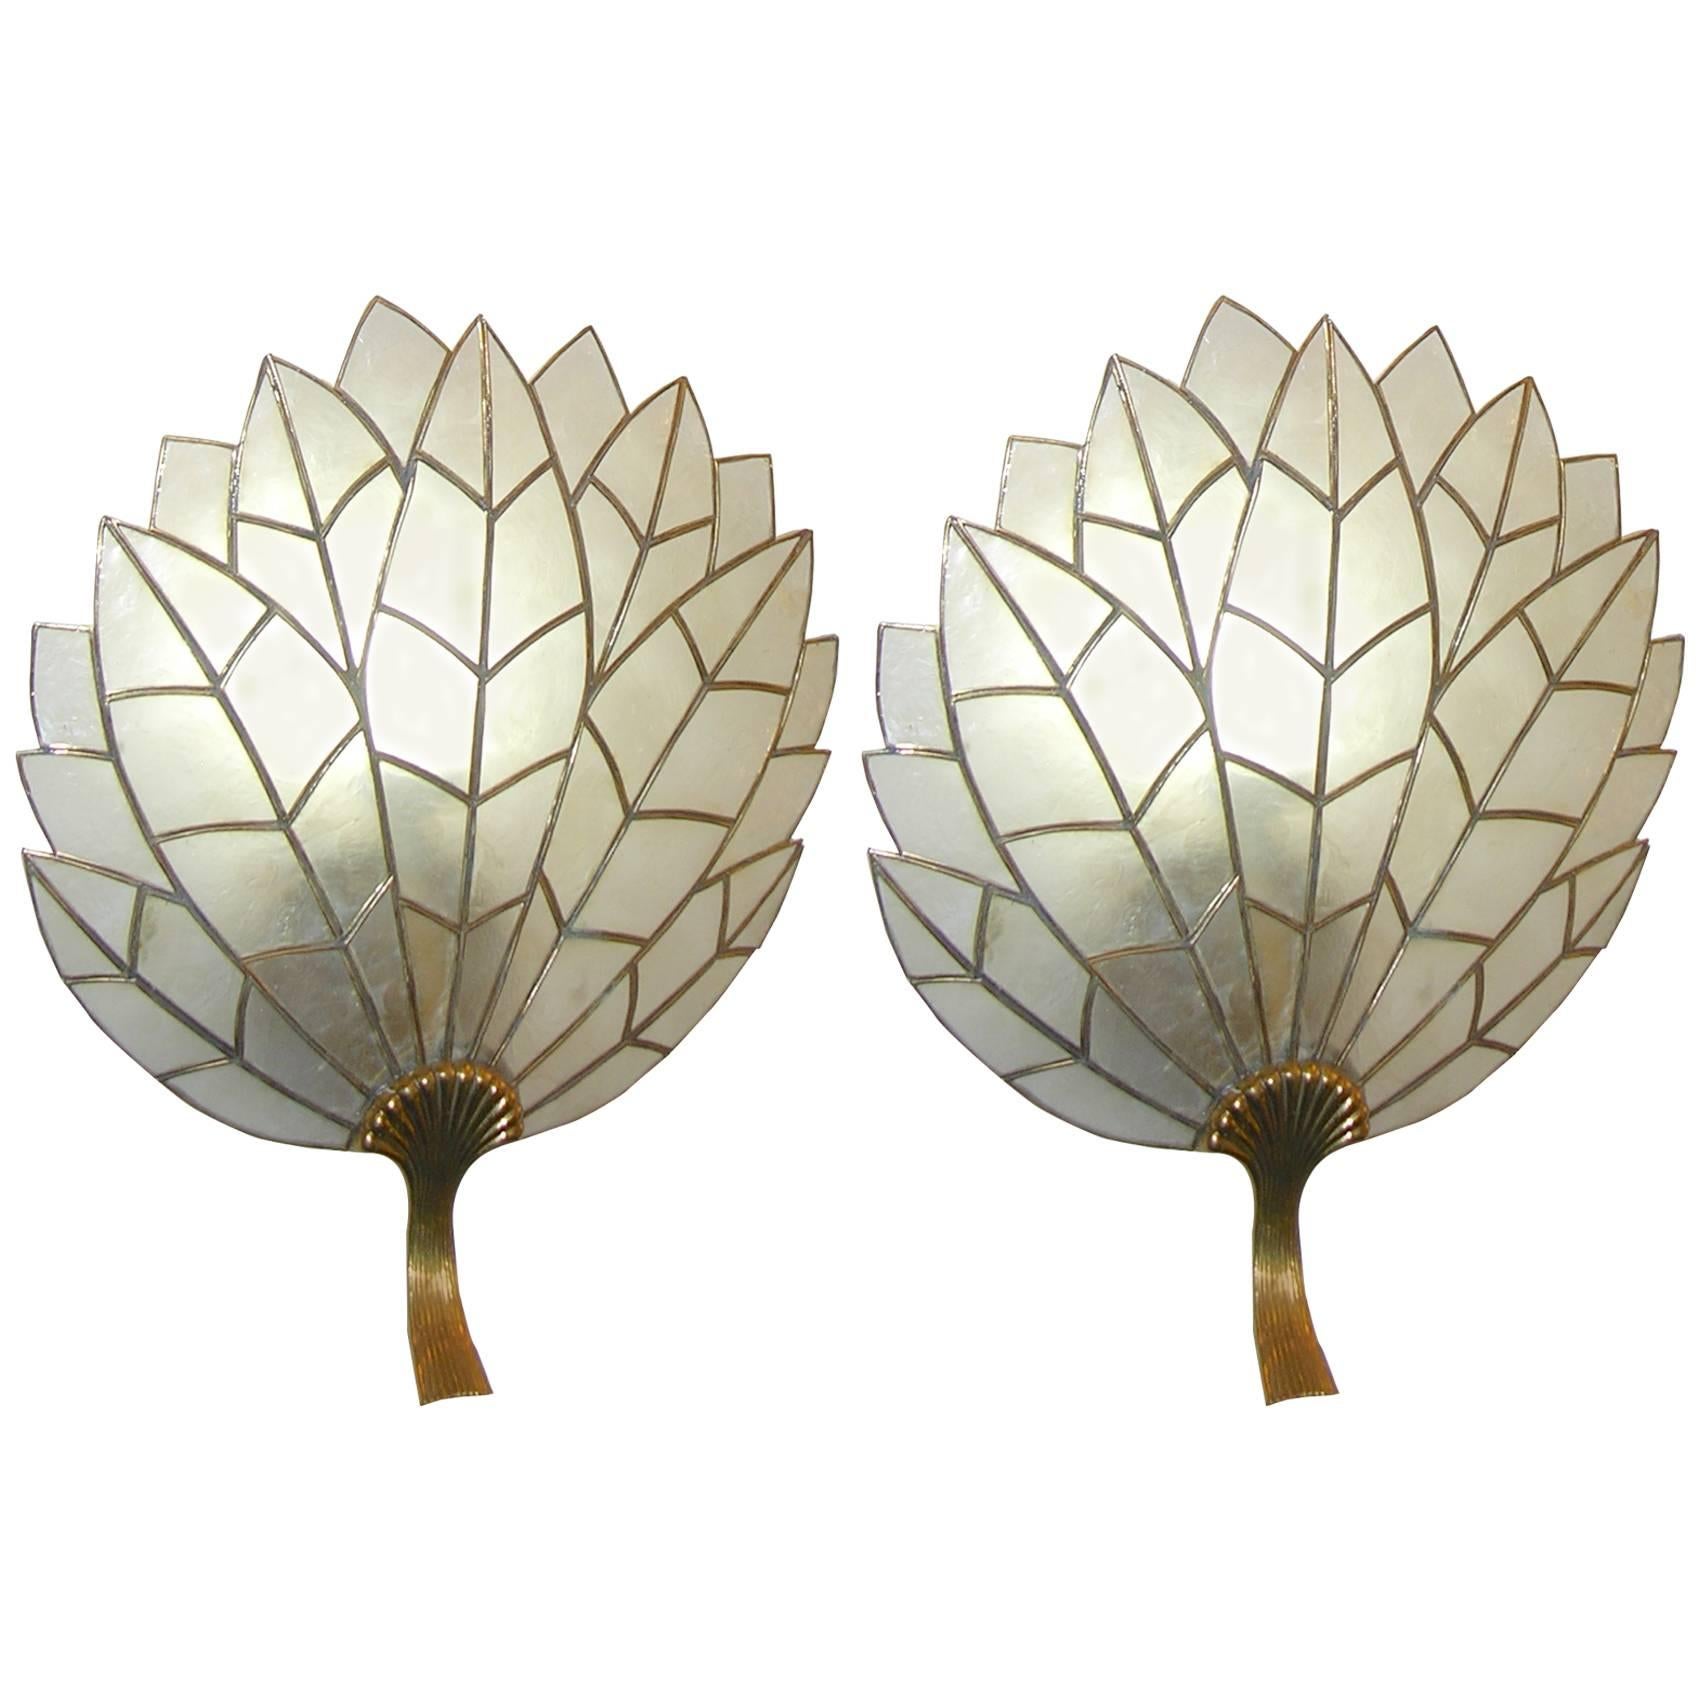 Art Deco Pair of Leaf Leaded Sconces in Mother-of-pearl